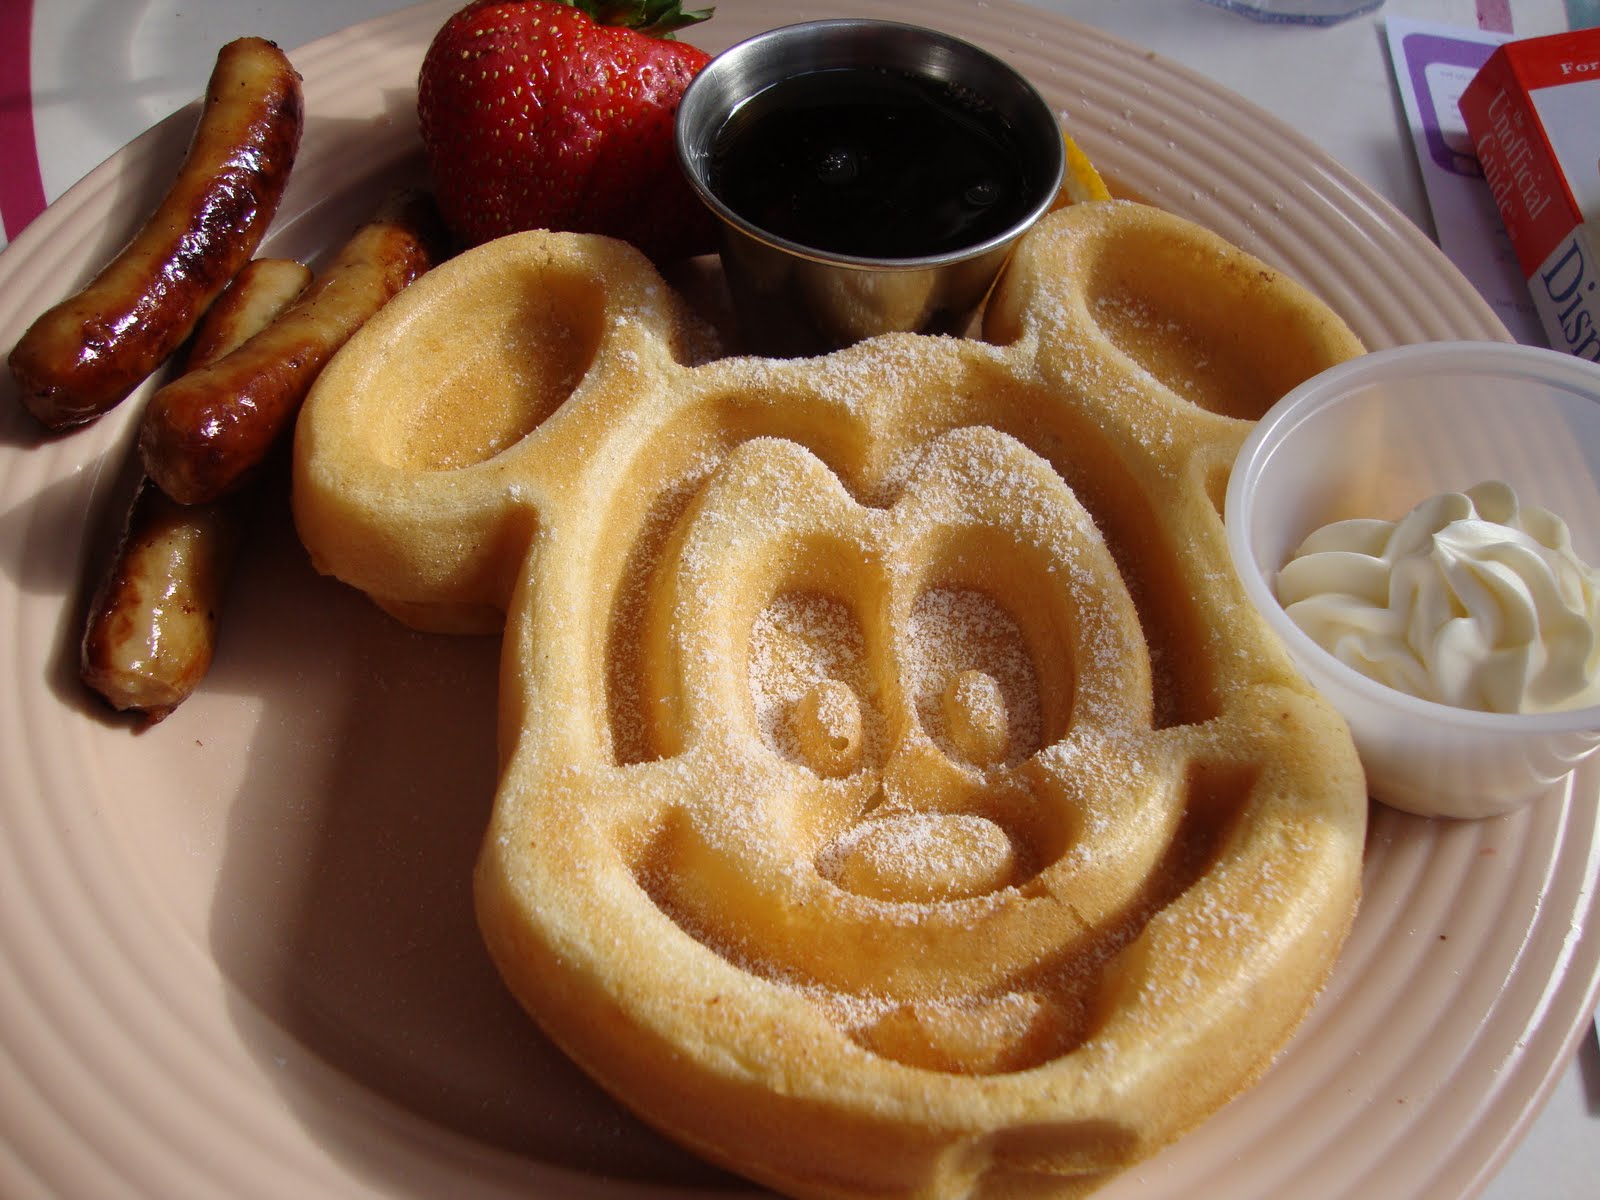 Two Girls and an Appetite: Favorite Meals in Disneyland